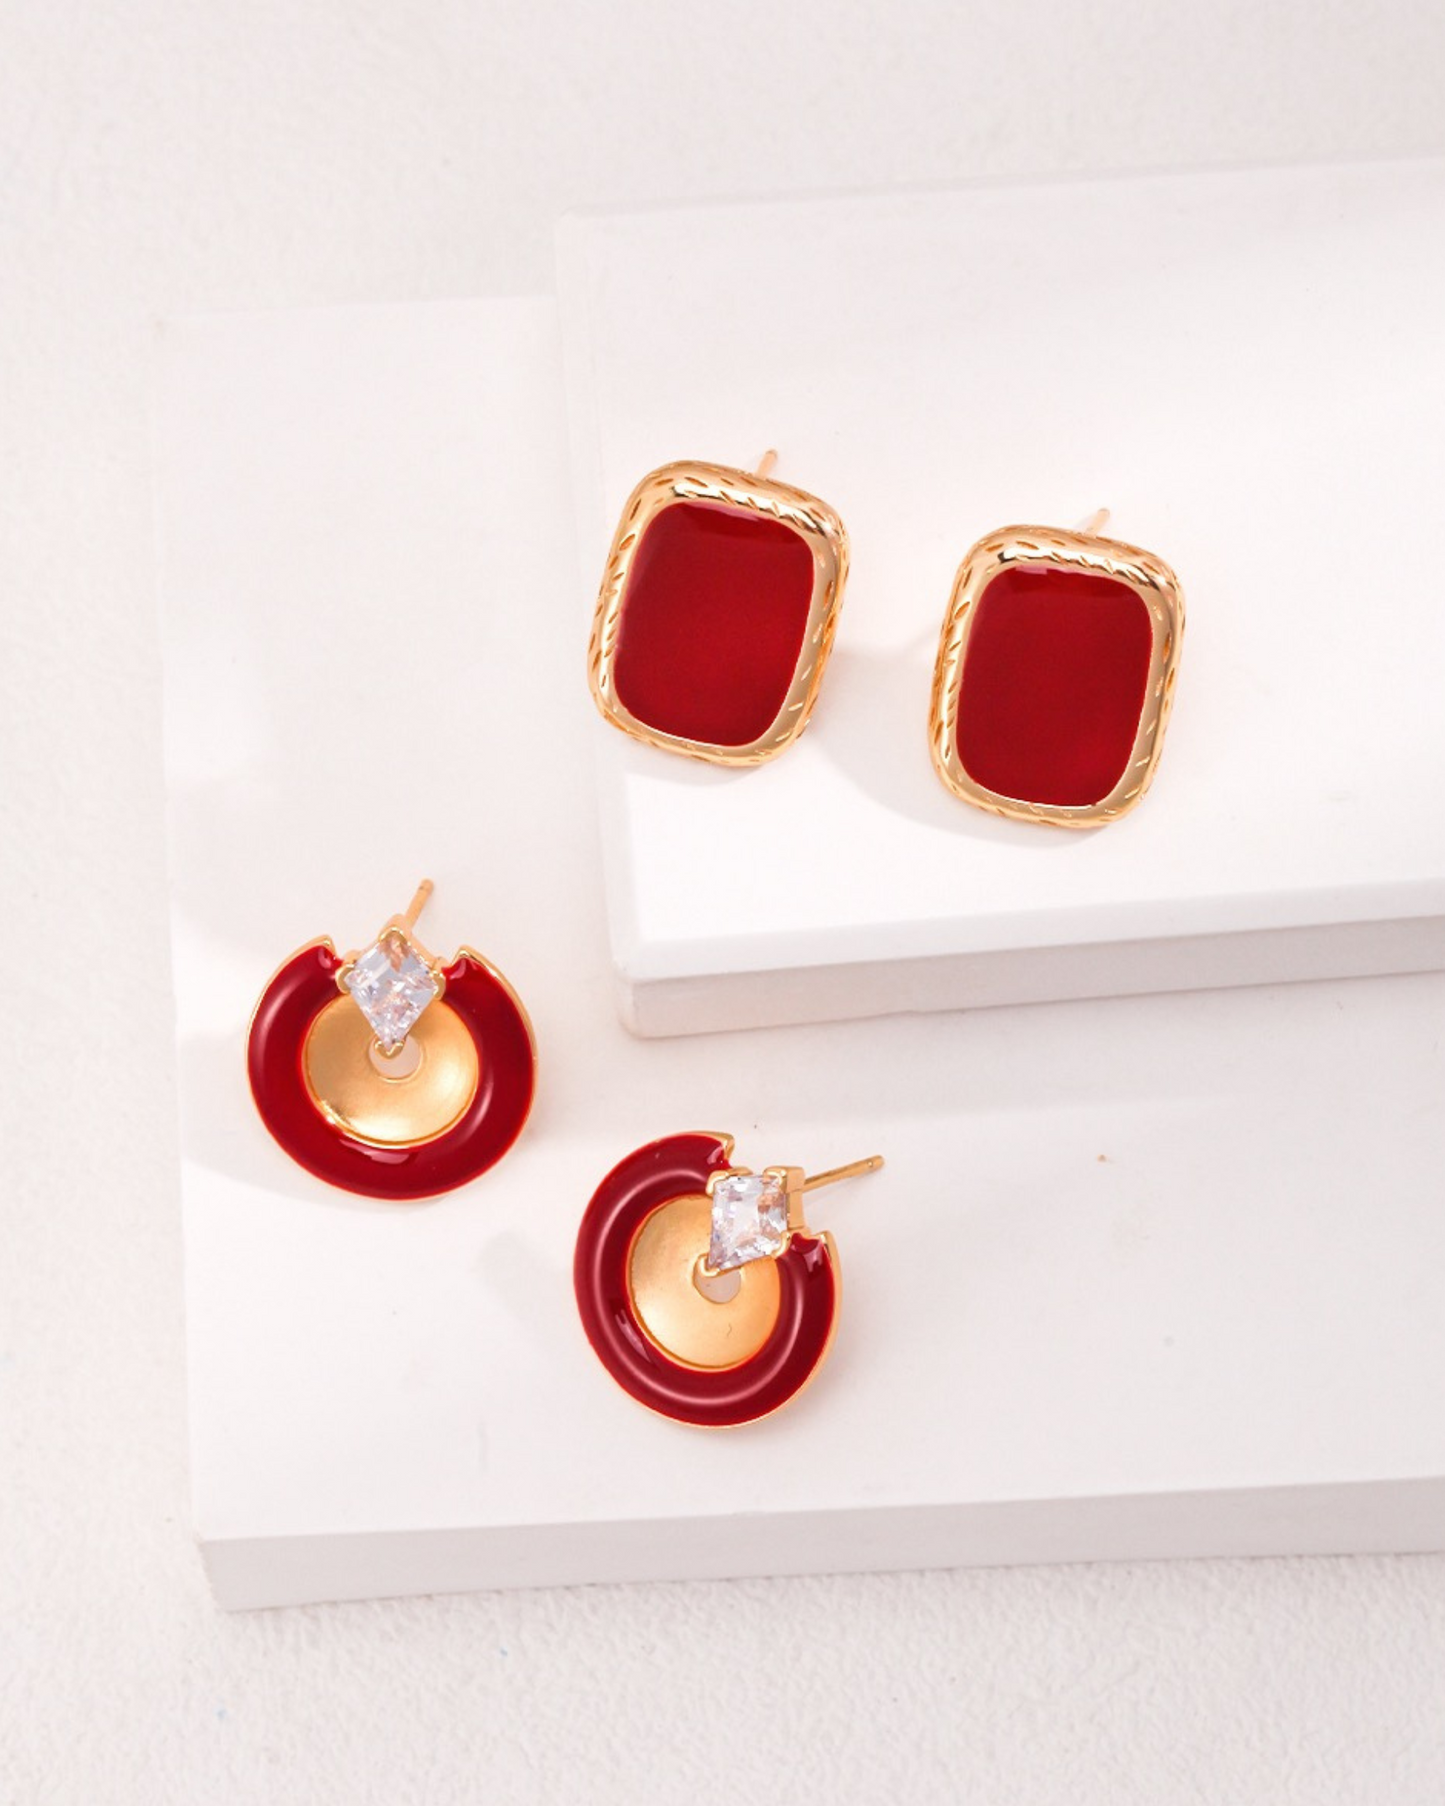 Gold and Red Enamel Rectangle Stud Earrings